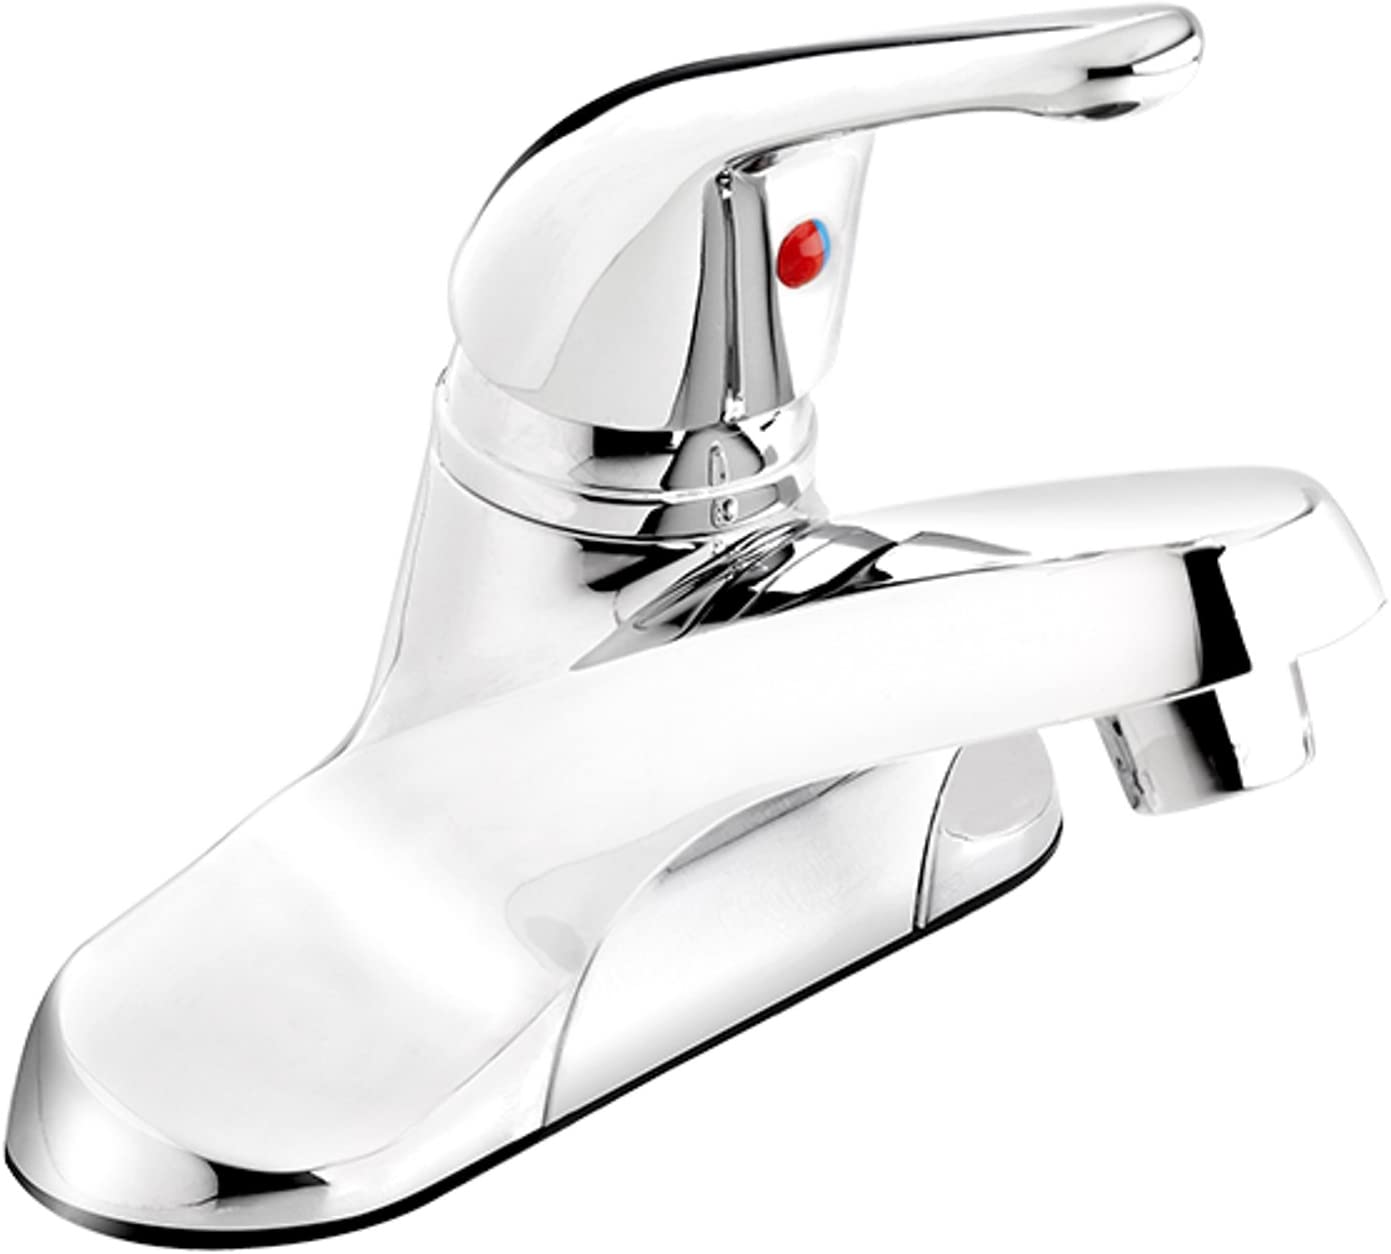 Eby23ccp 7.48 X 9.45 X 5.12 In. Bathroom Sink Faucet With 1 Handle & 4 In. Centerset, Polished Chrome